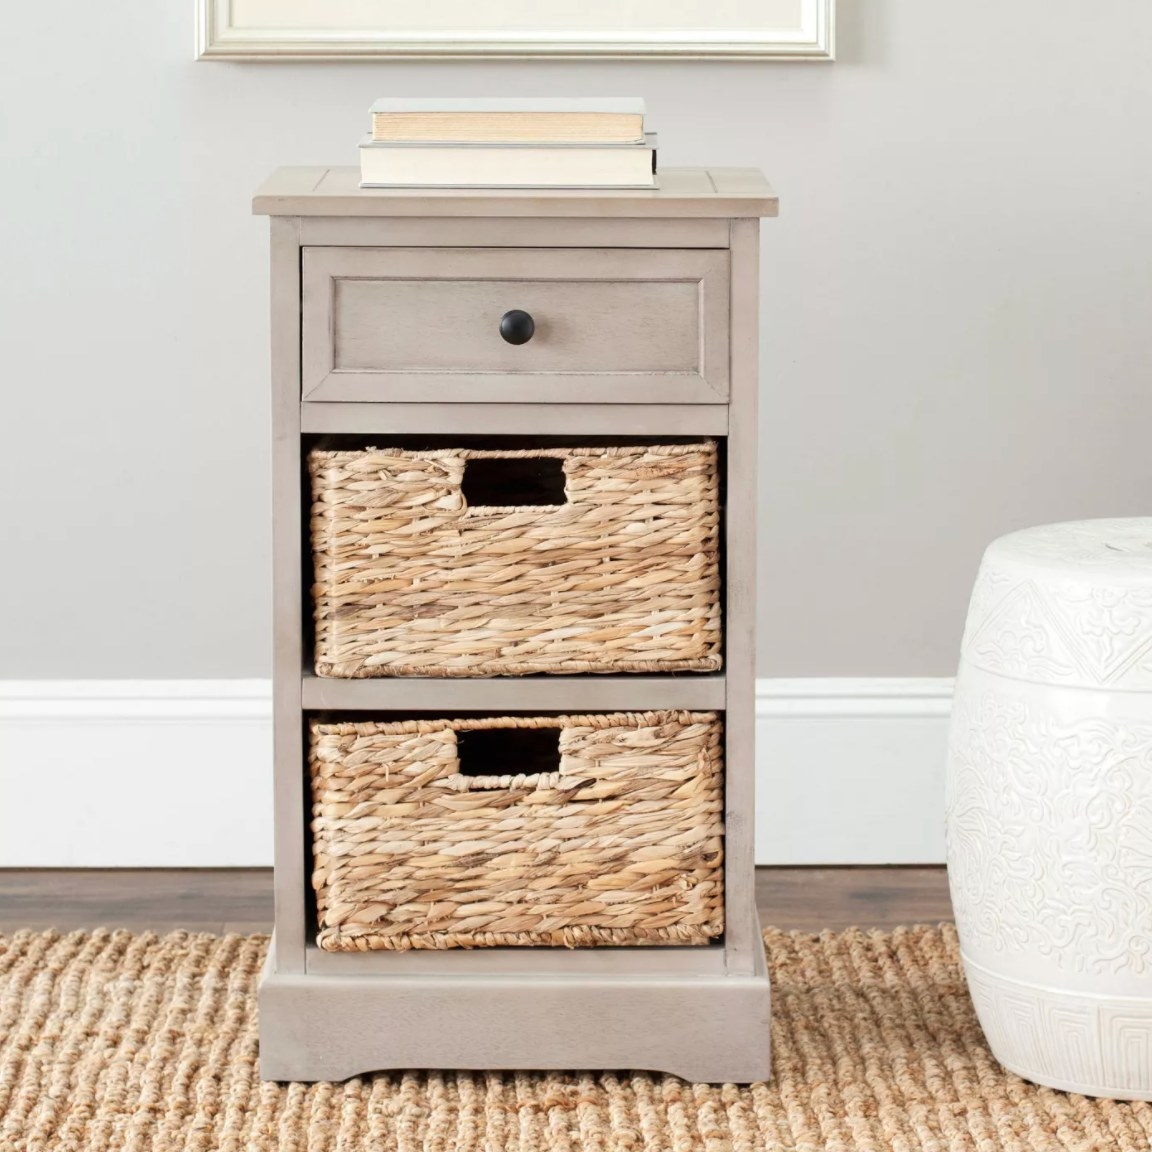 The side table with drawers in gray